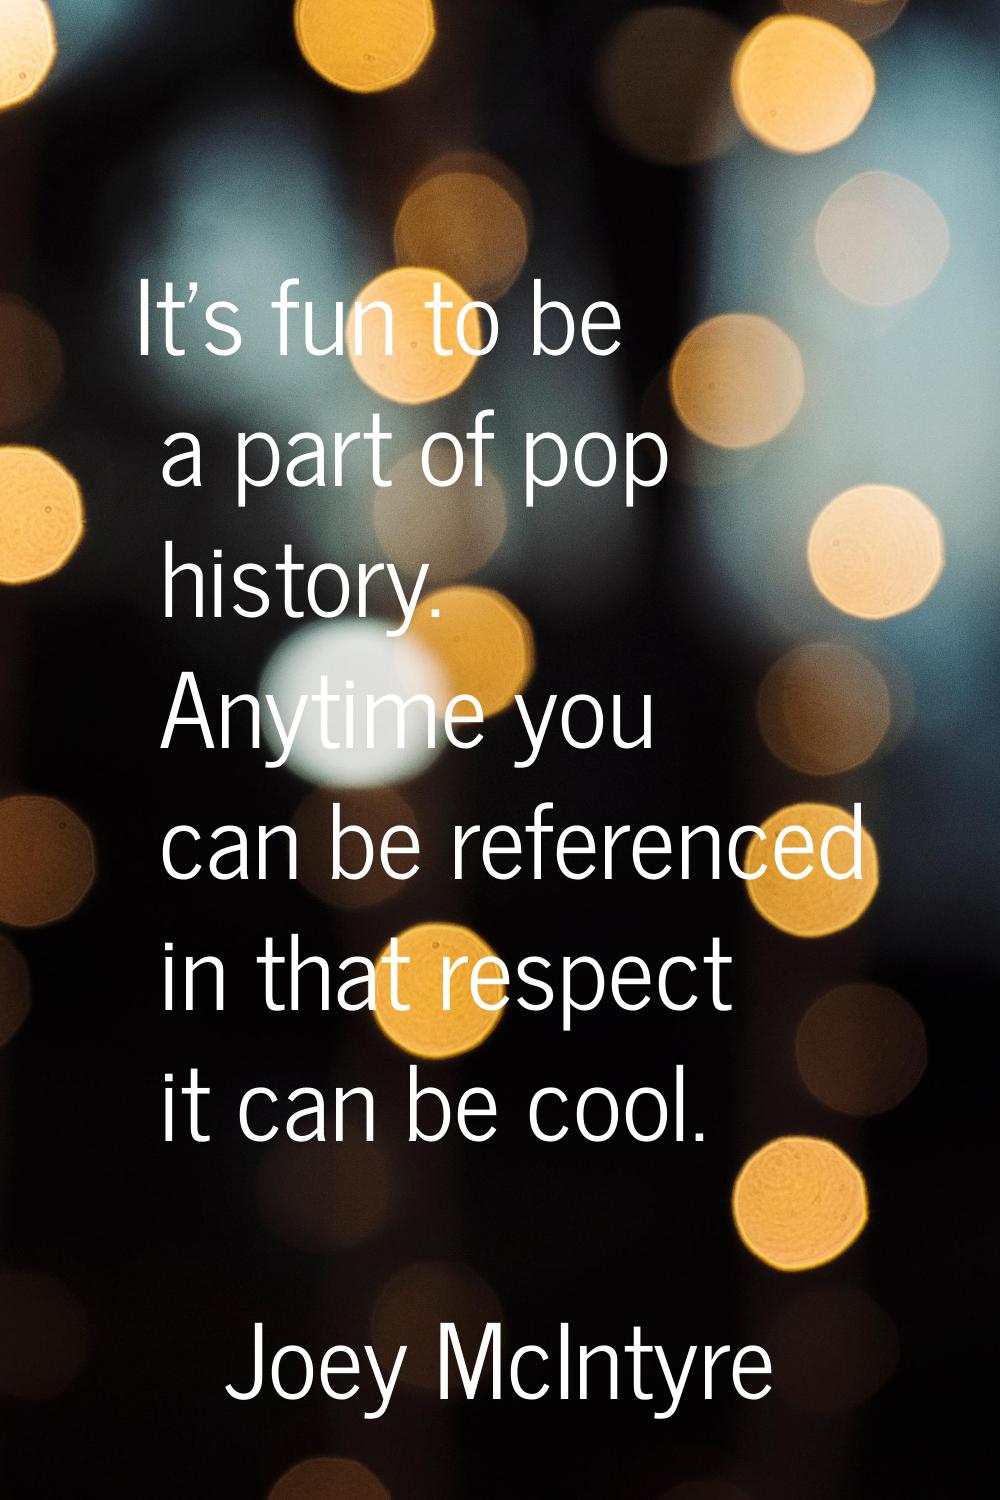 It's fun to be a part of pop history. Anytime you can be referenced in that respect it can be cool.